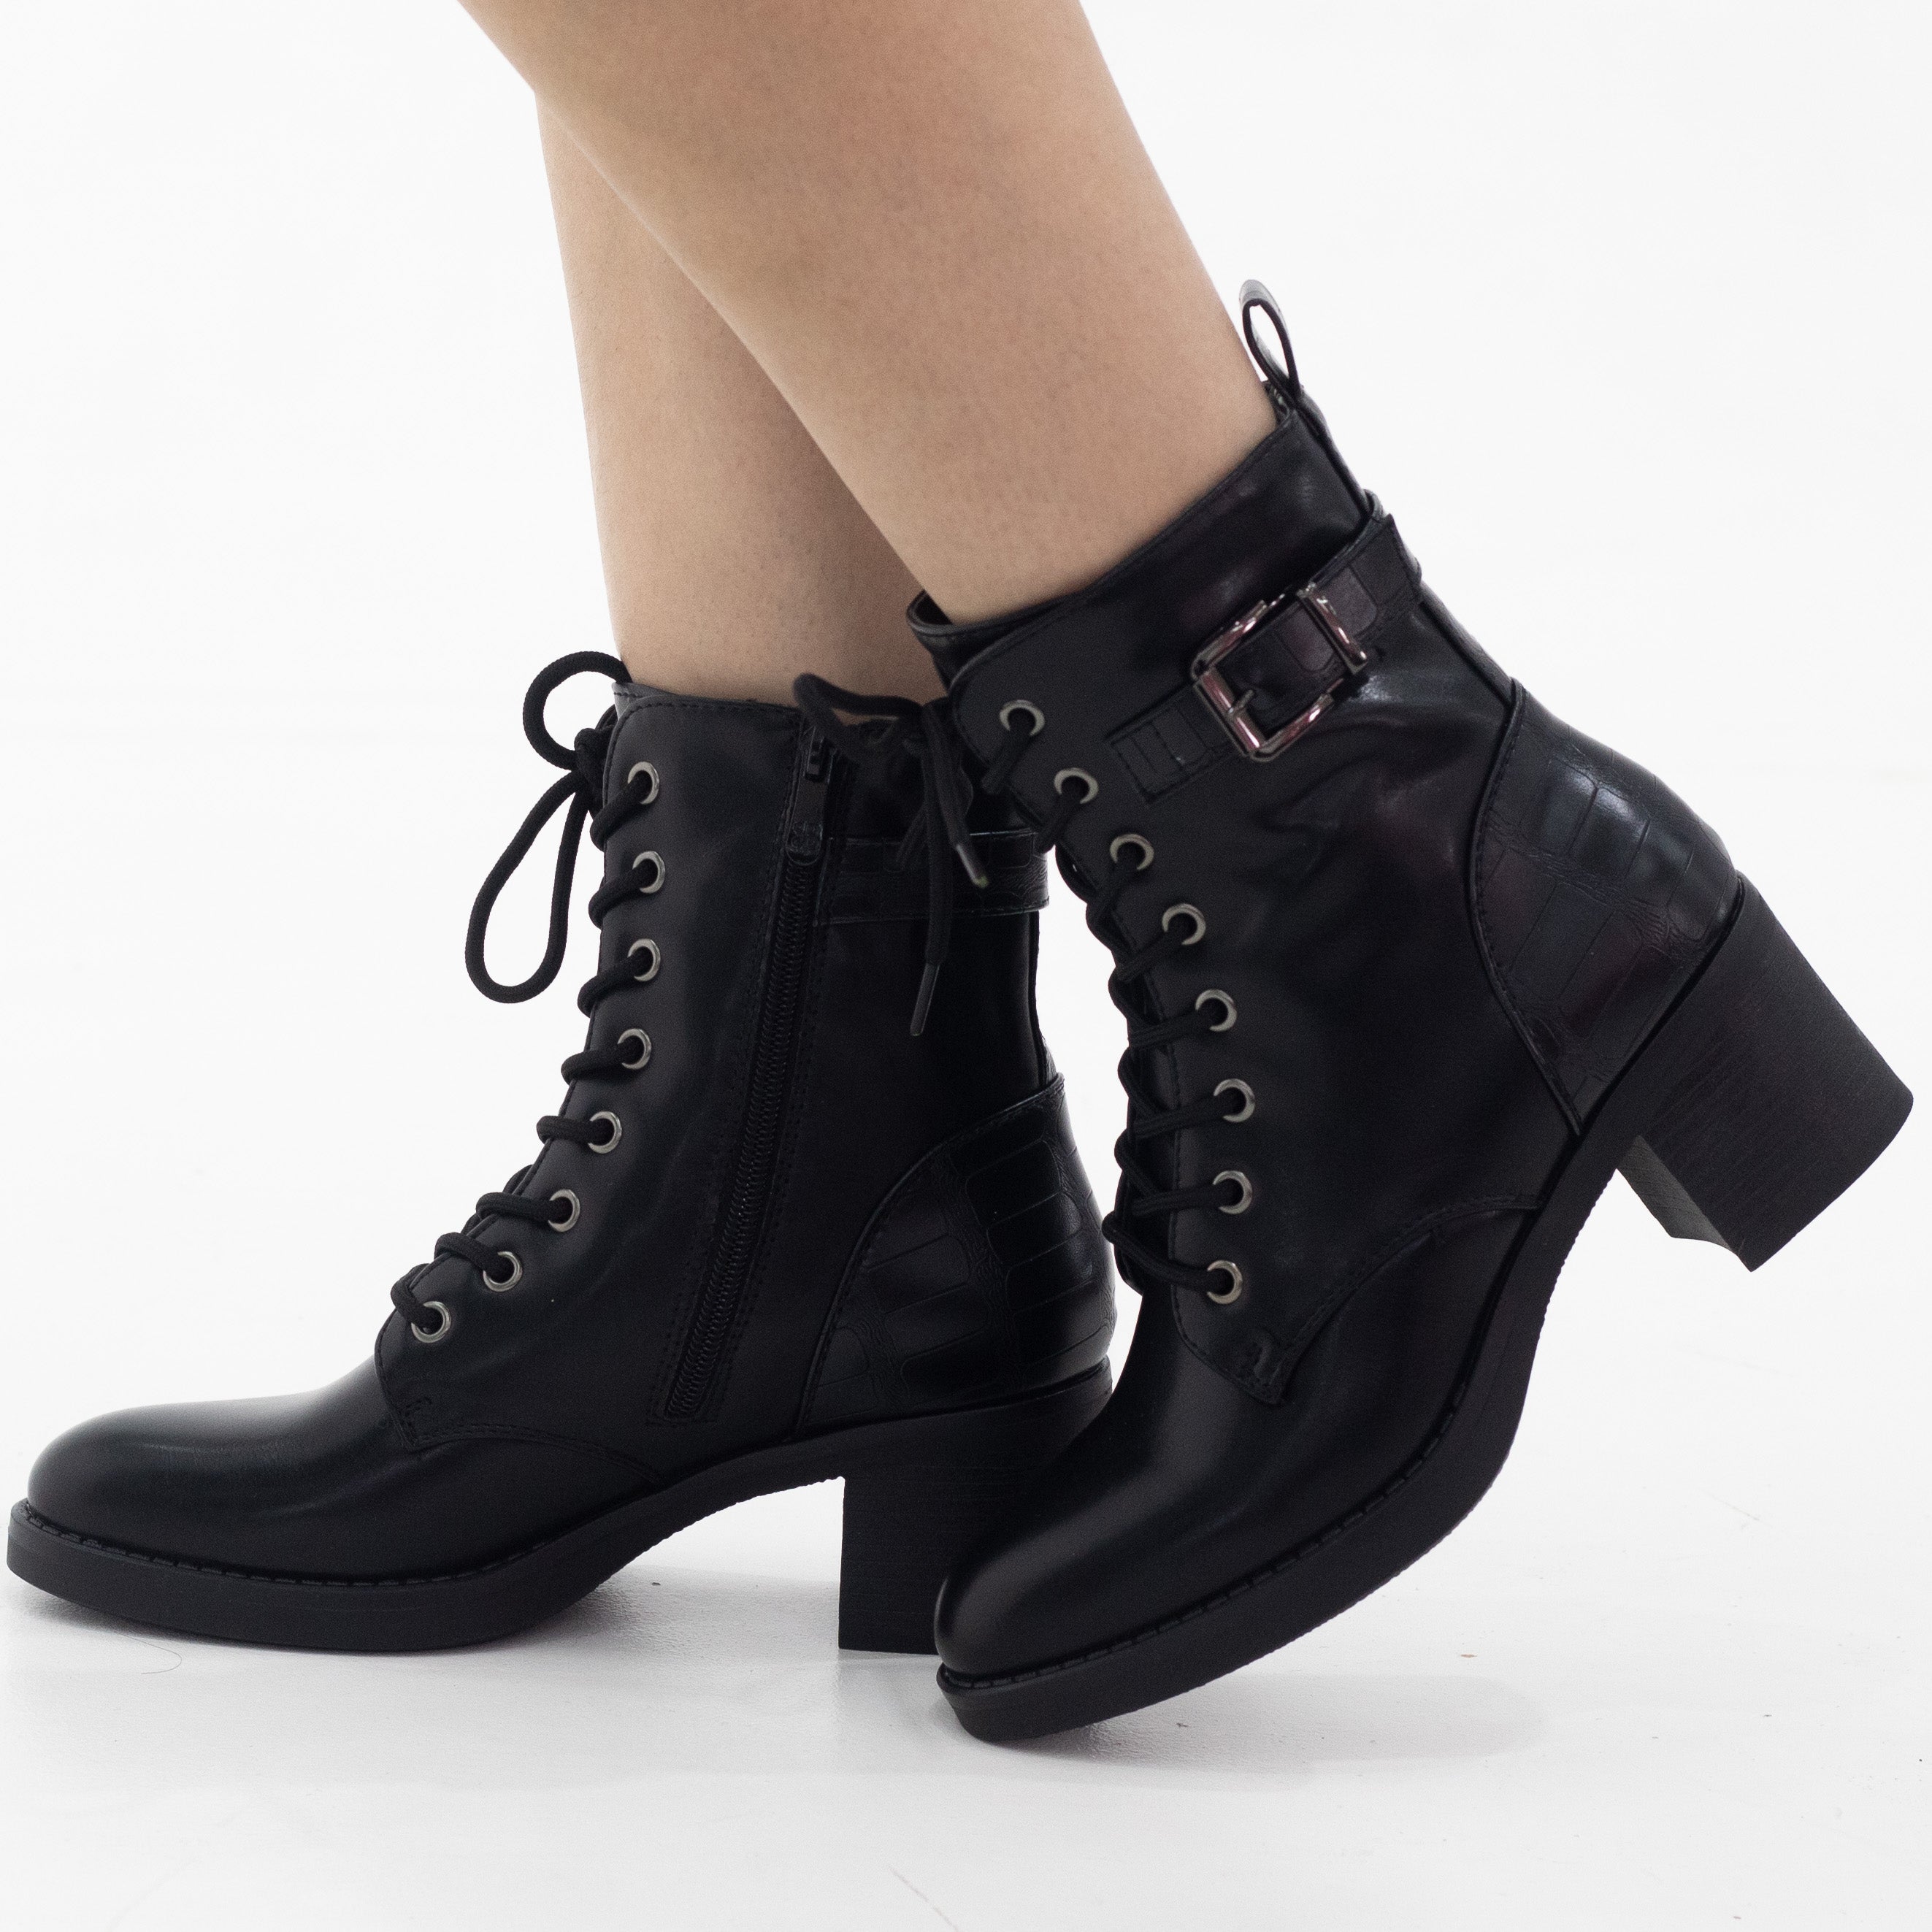 Black biker lace up 6.cm heel ankle boot maddy